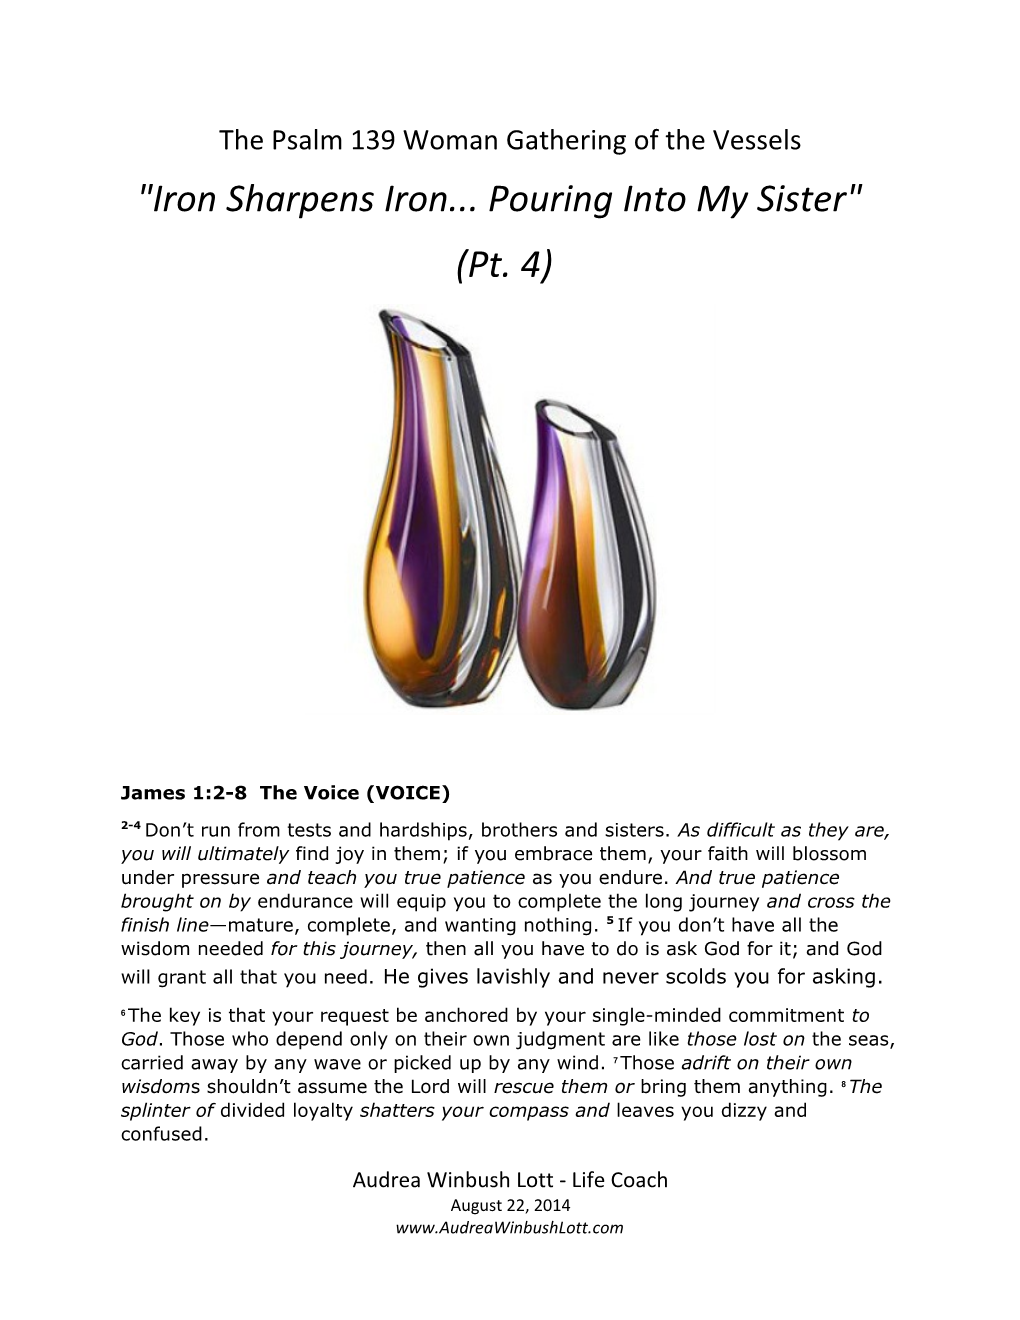 The Psalm 139 Woman Gathering of the Vessels